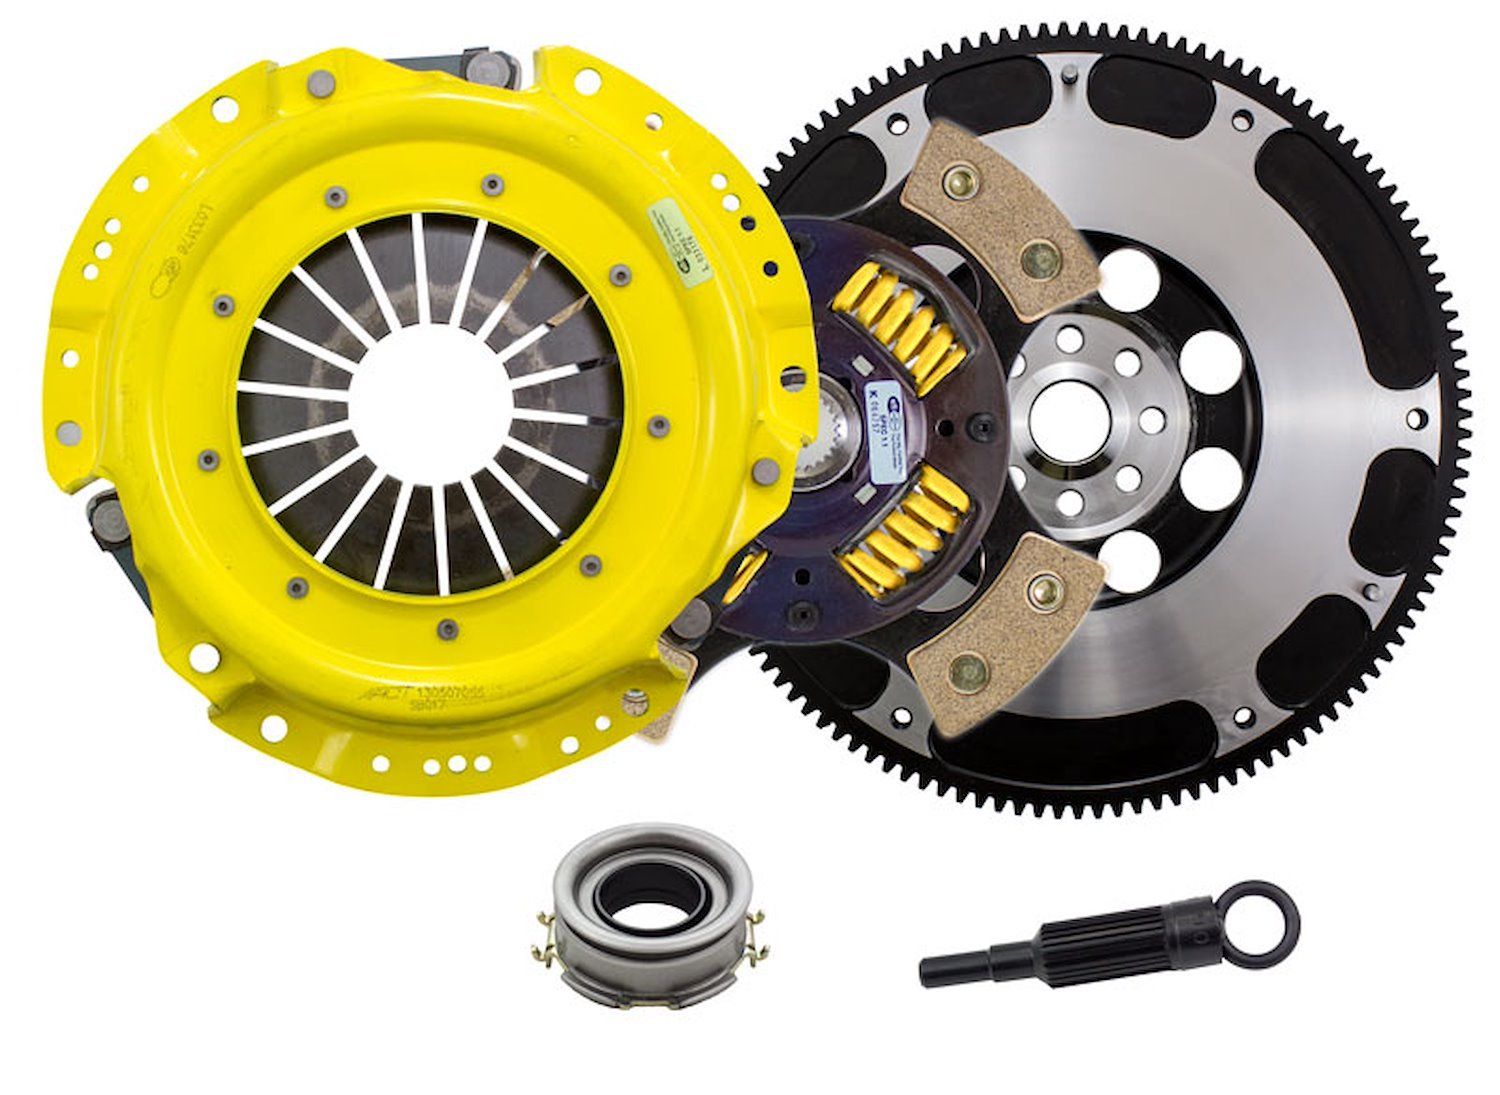 HD/Race Sprung 4-Pad Transmission Clutch Kit Fits Select Multiple Makes/Models